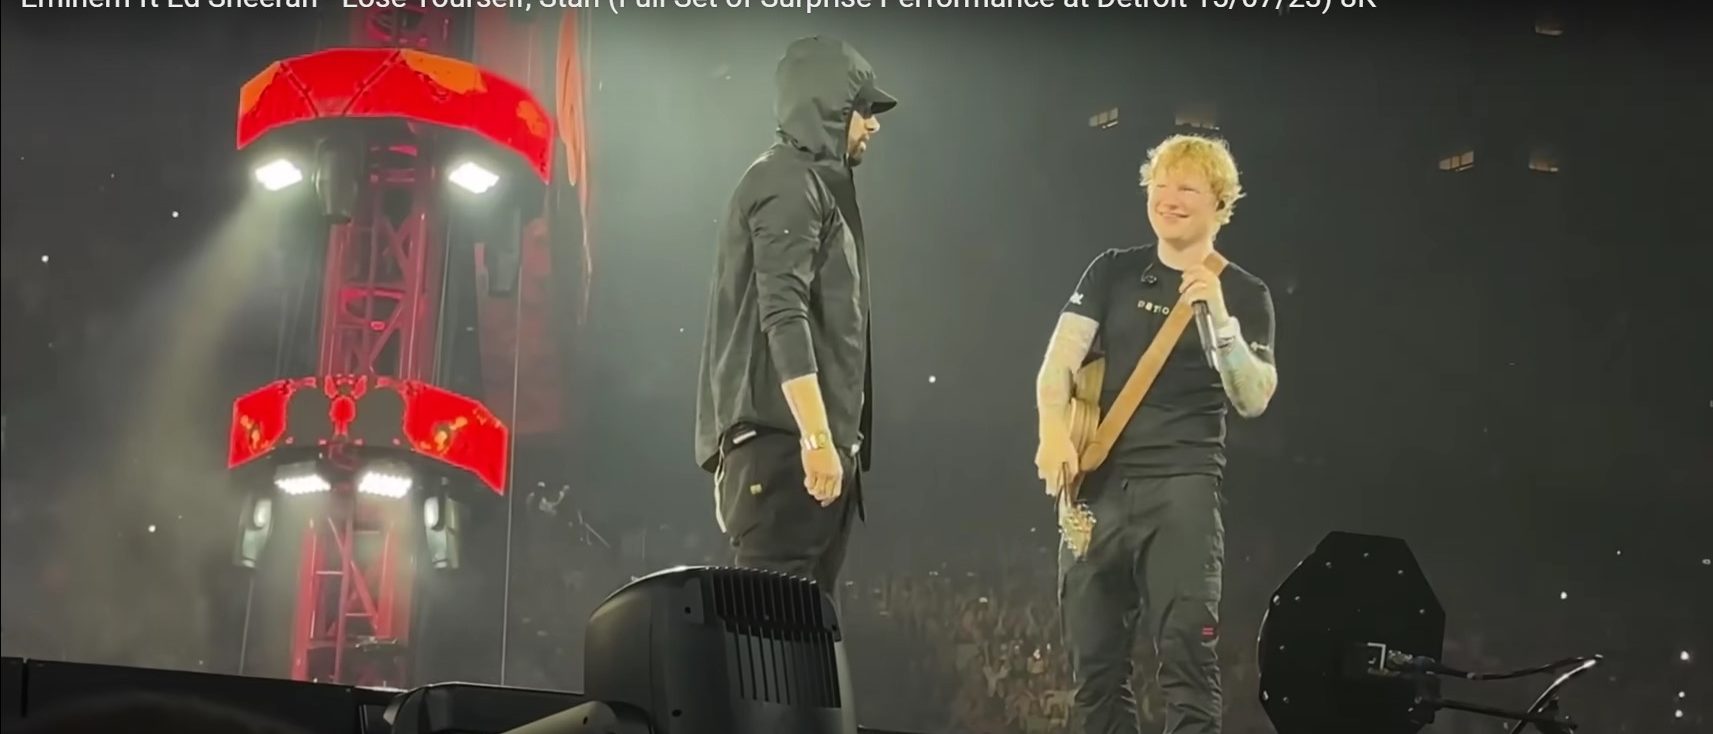 Eminem Stuns Fans By Joining Ed Sheeran For Surprise Performance In